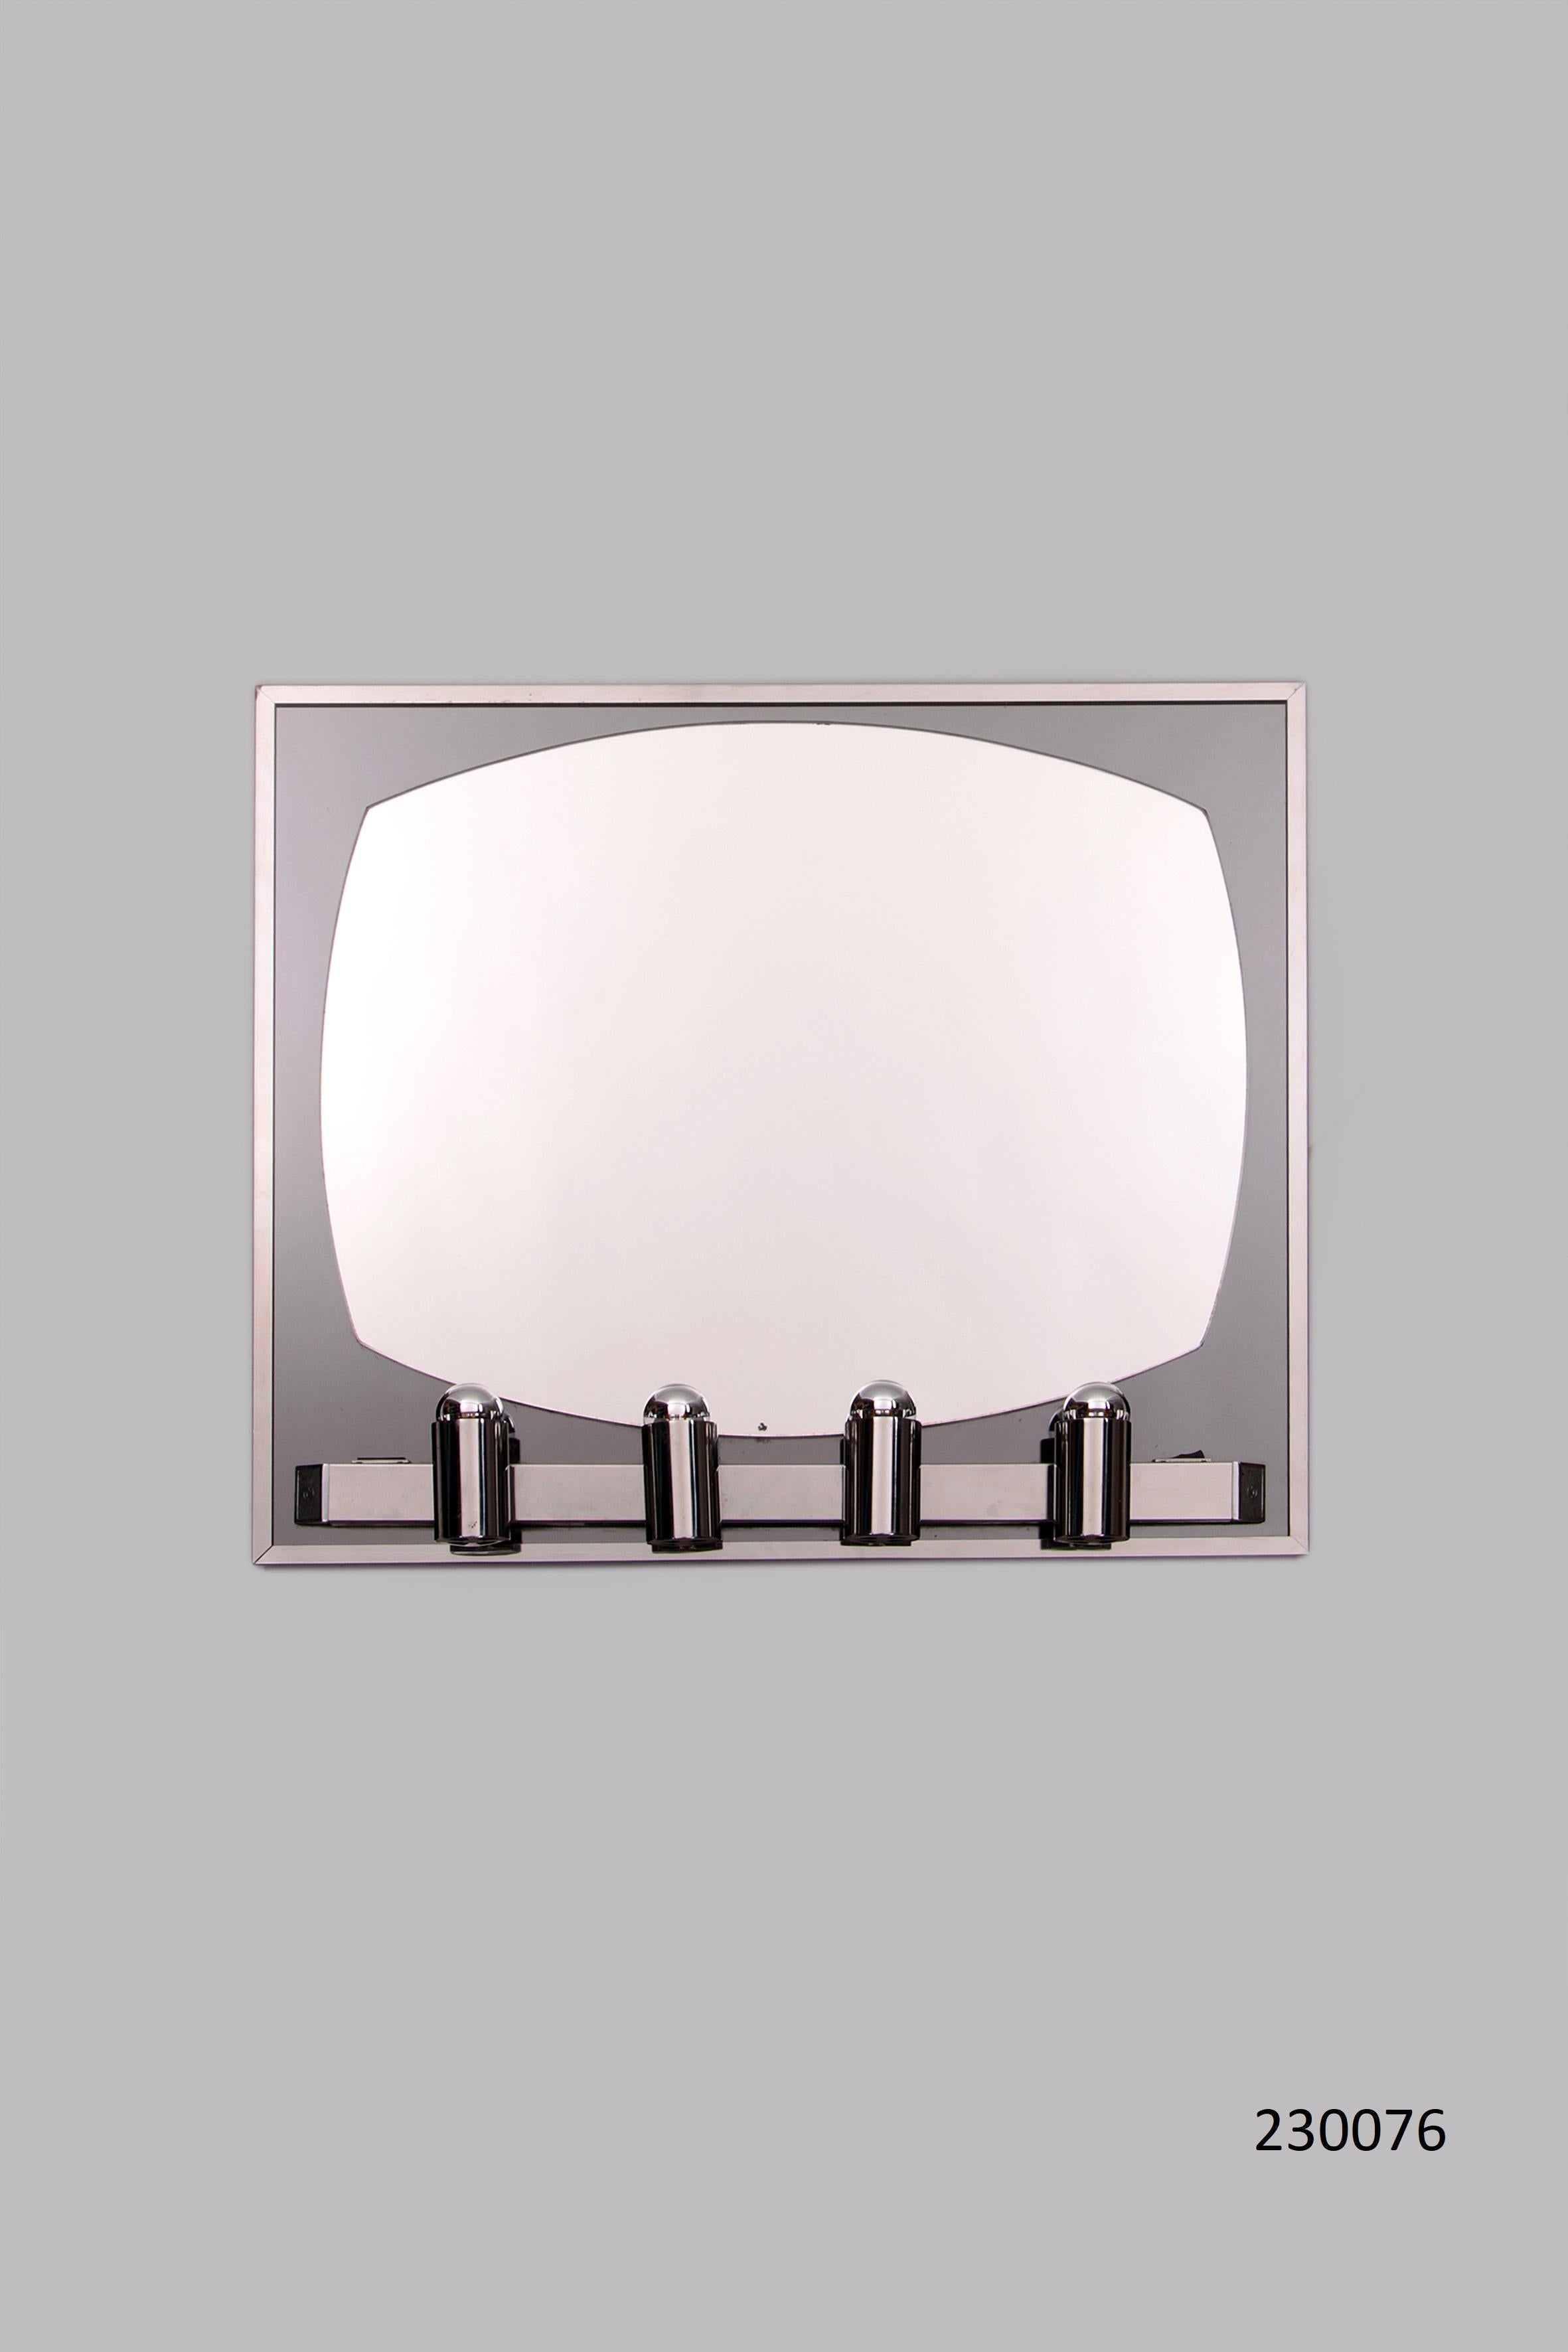 Makeup enthusiasts around the world have fallen in love with its timeless elegance, contemporary luxury features and Hollywood glamour.

This is a make-up mirror from the 1960s, used in a theater, it stood there at an angle on a table against the